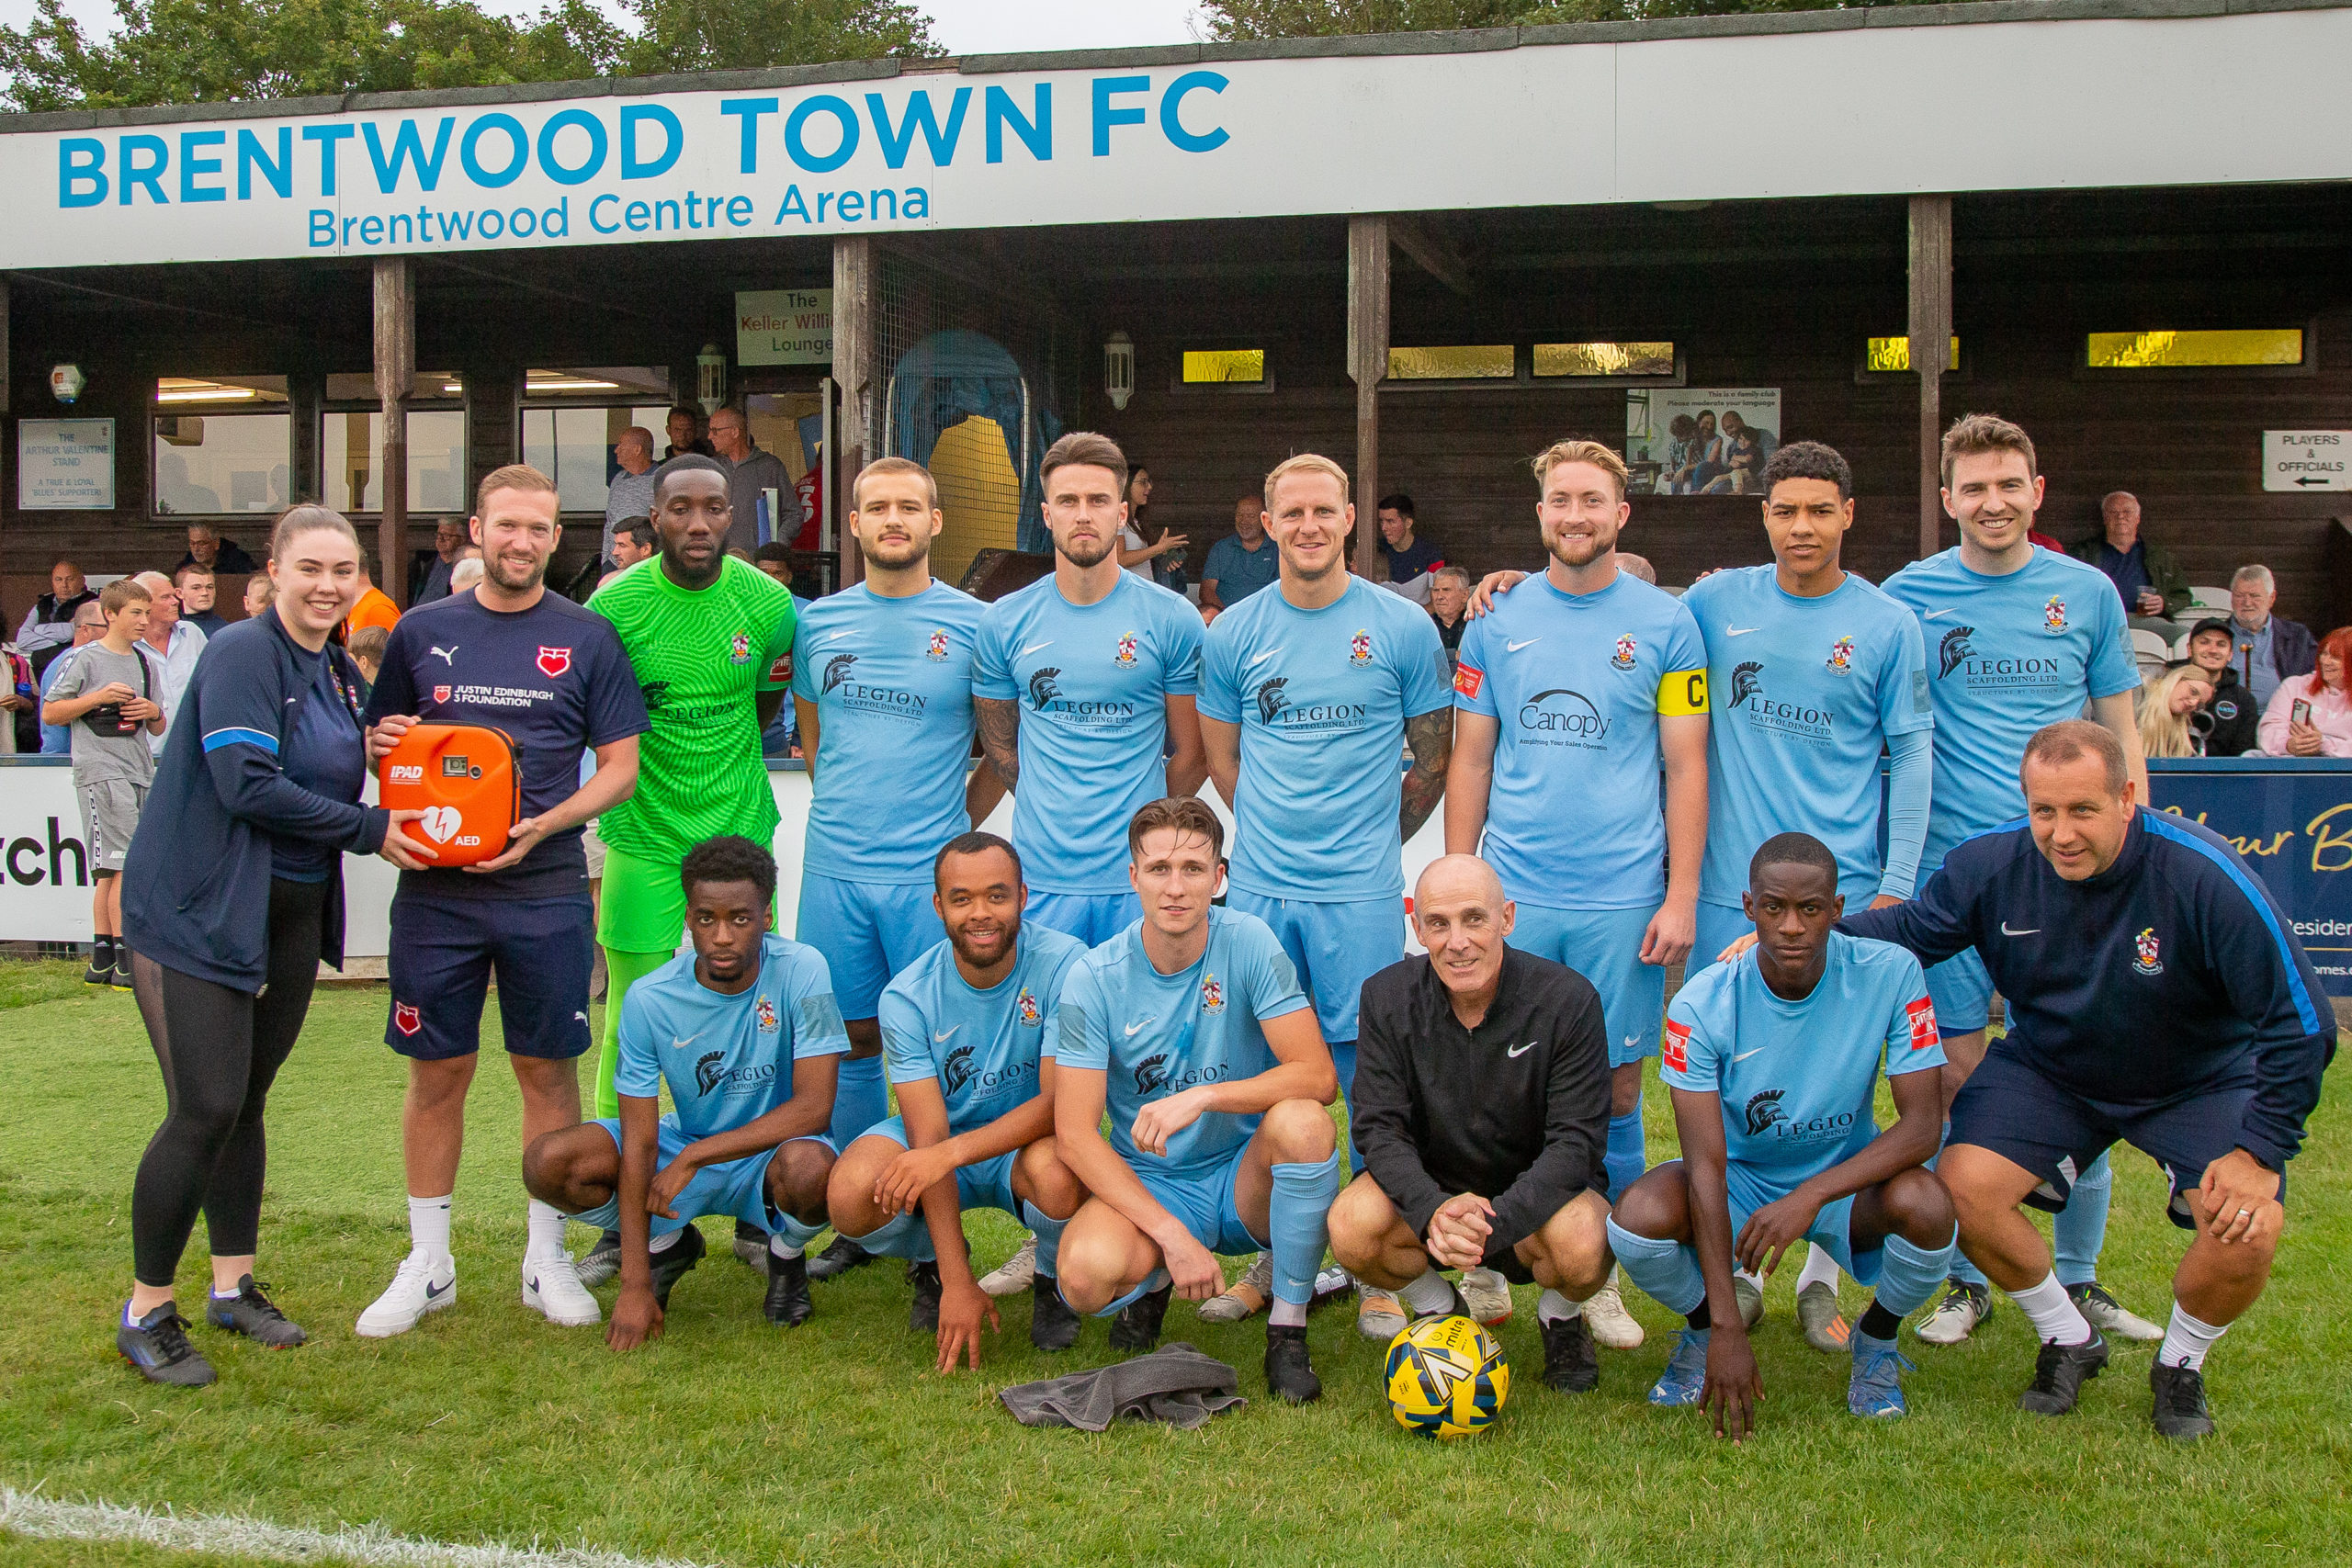 Brentwood Town Football Club Is The Latest JE3 Foundation Defibrillator Recipient